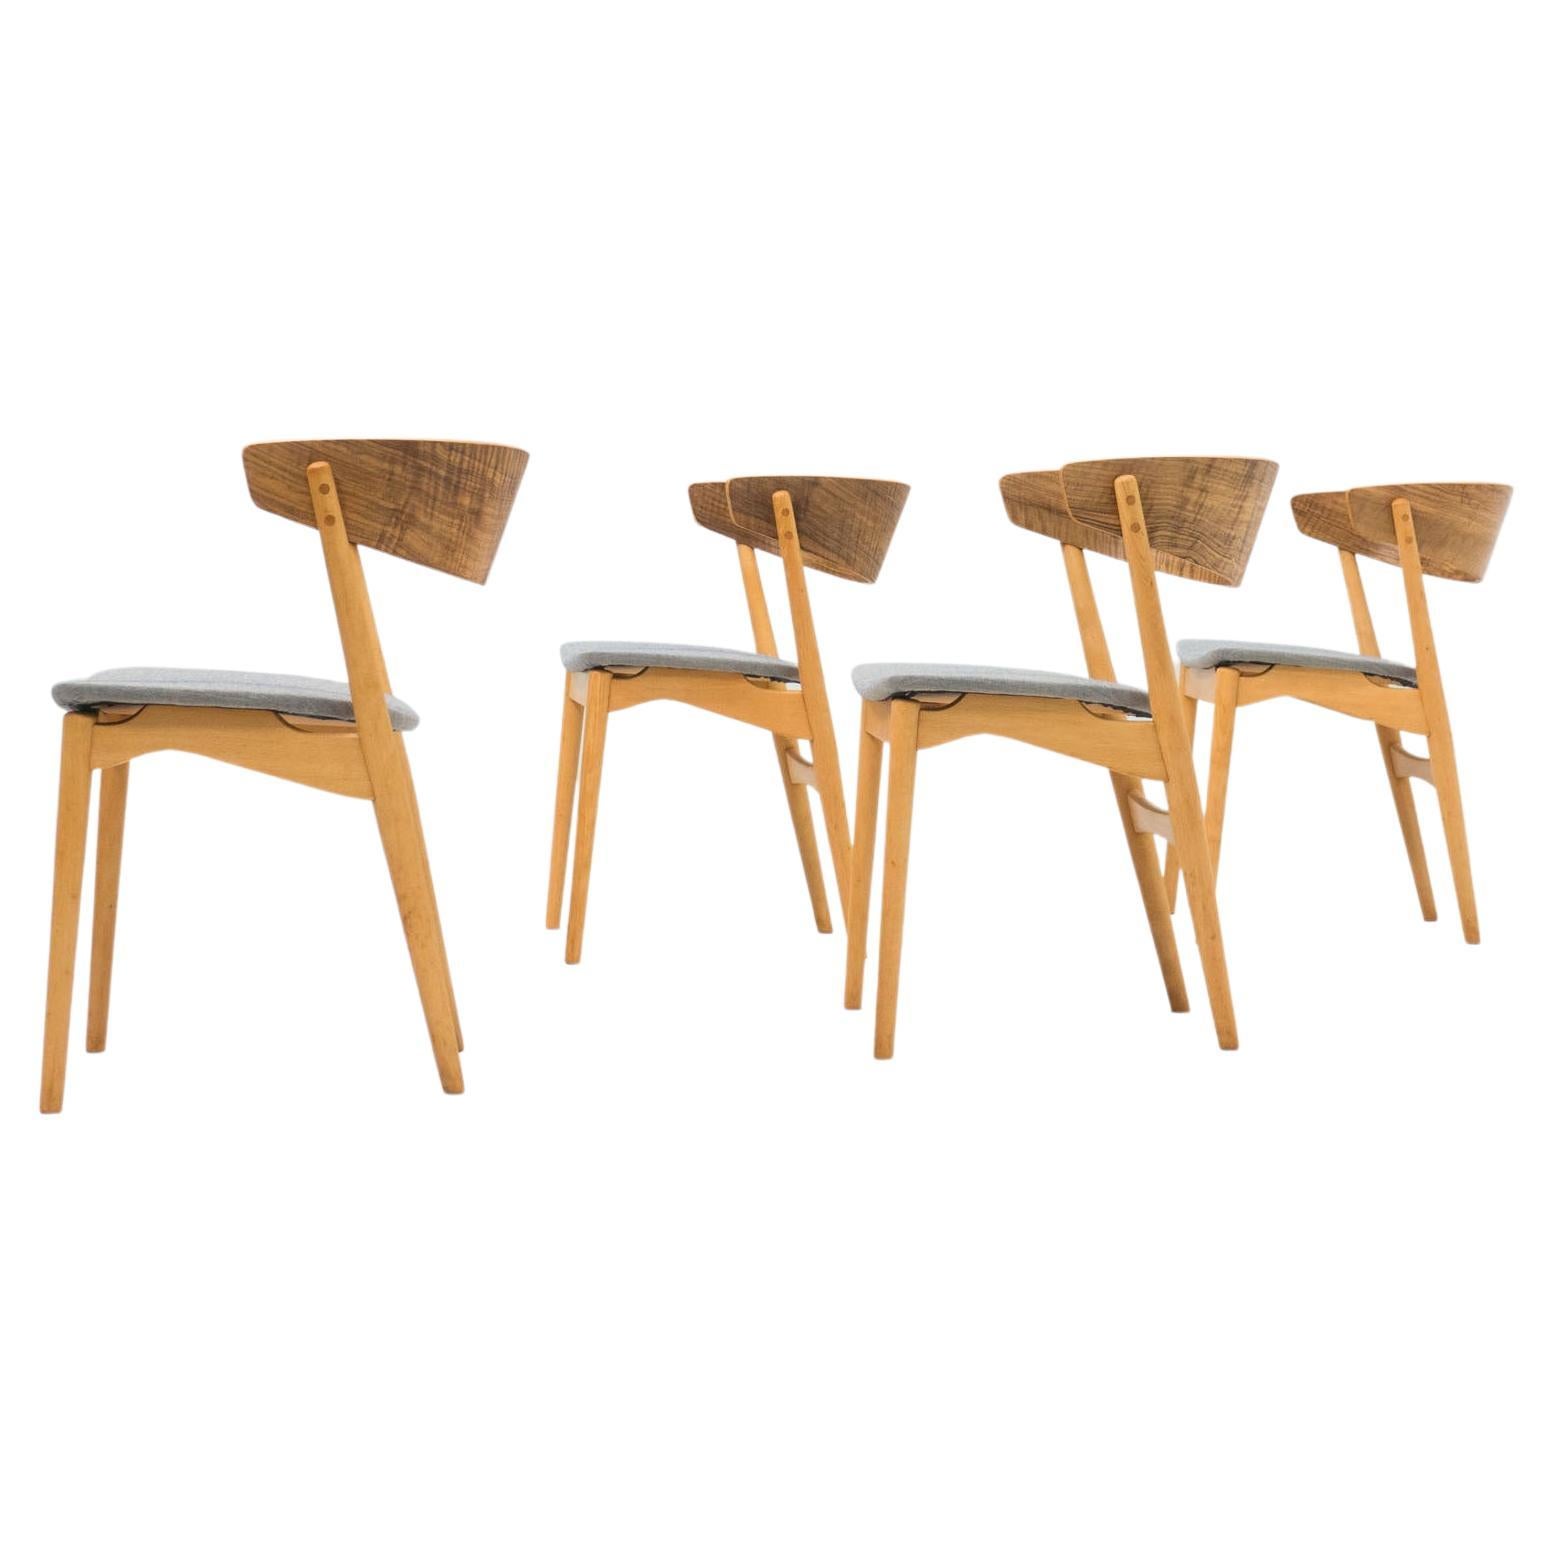 Sibast Møbler Set of Four ‘No. 7’ Dining Chairs, Helge Sibast